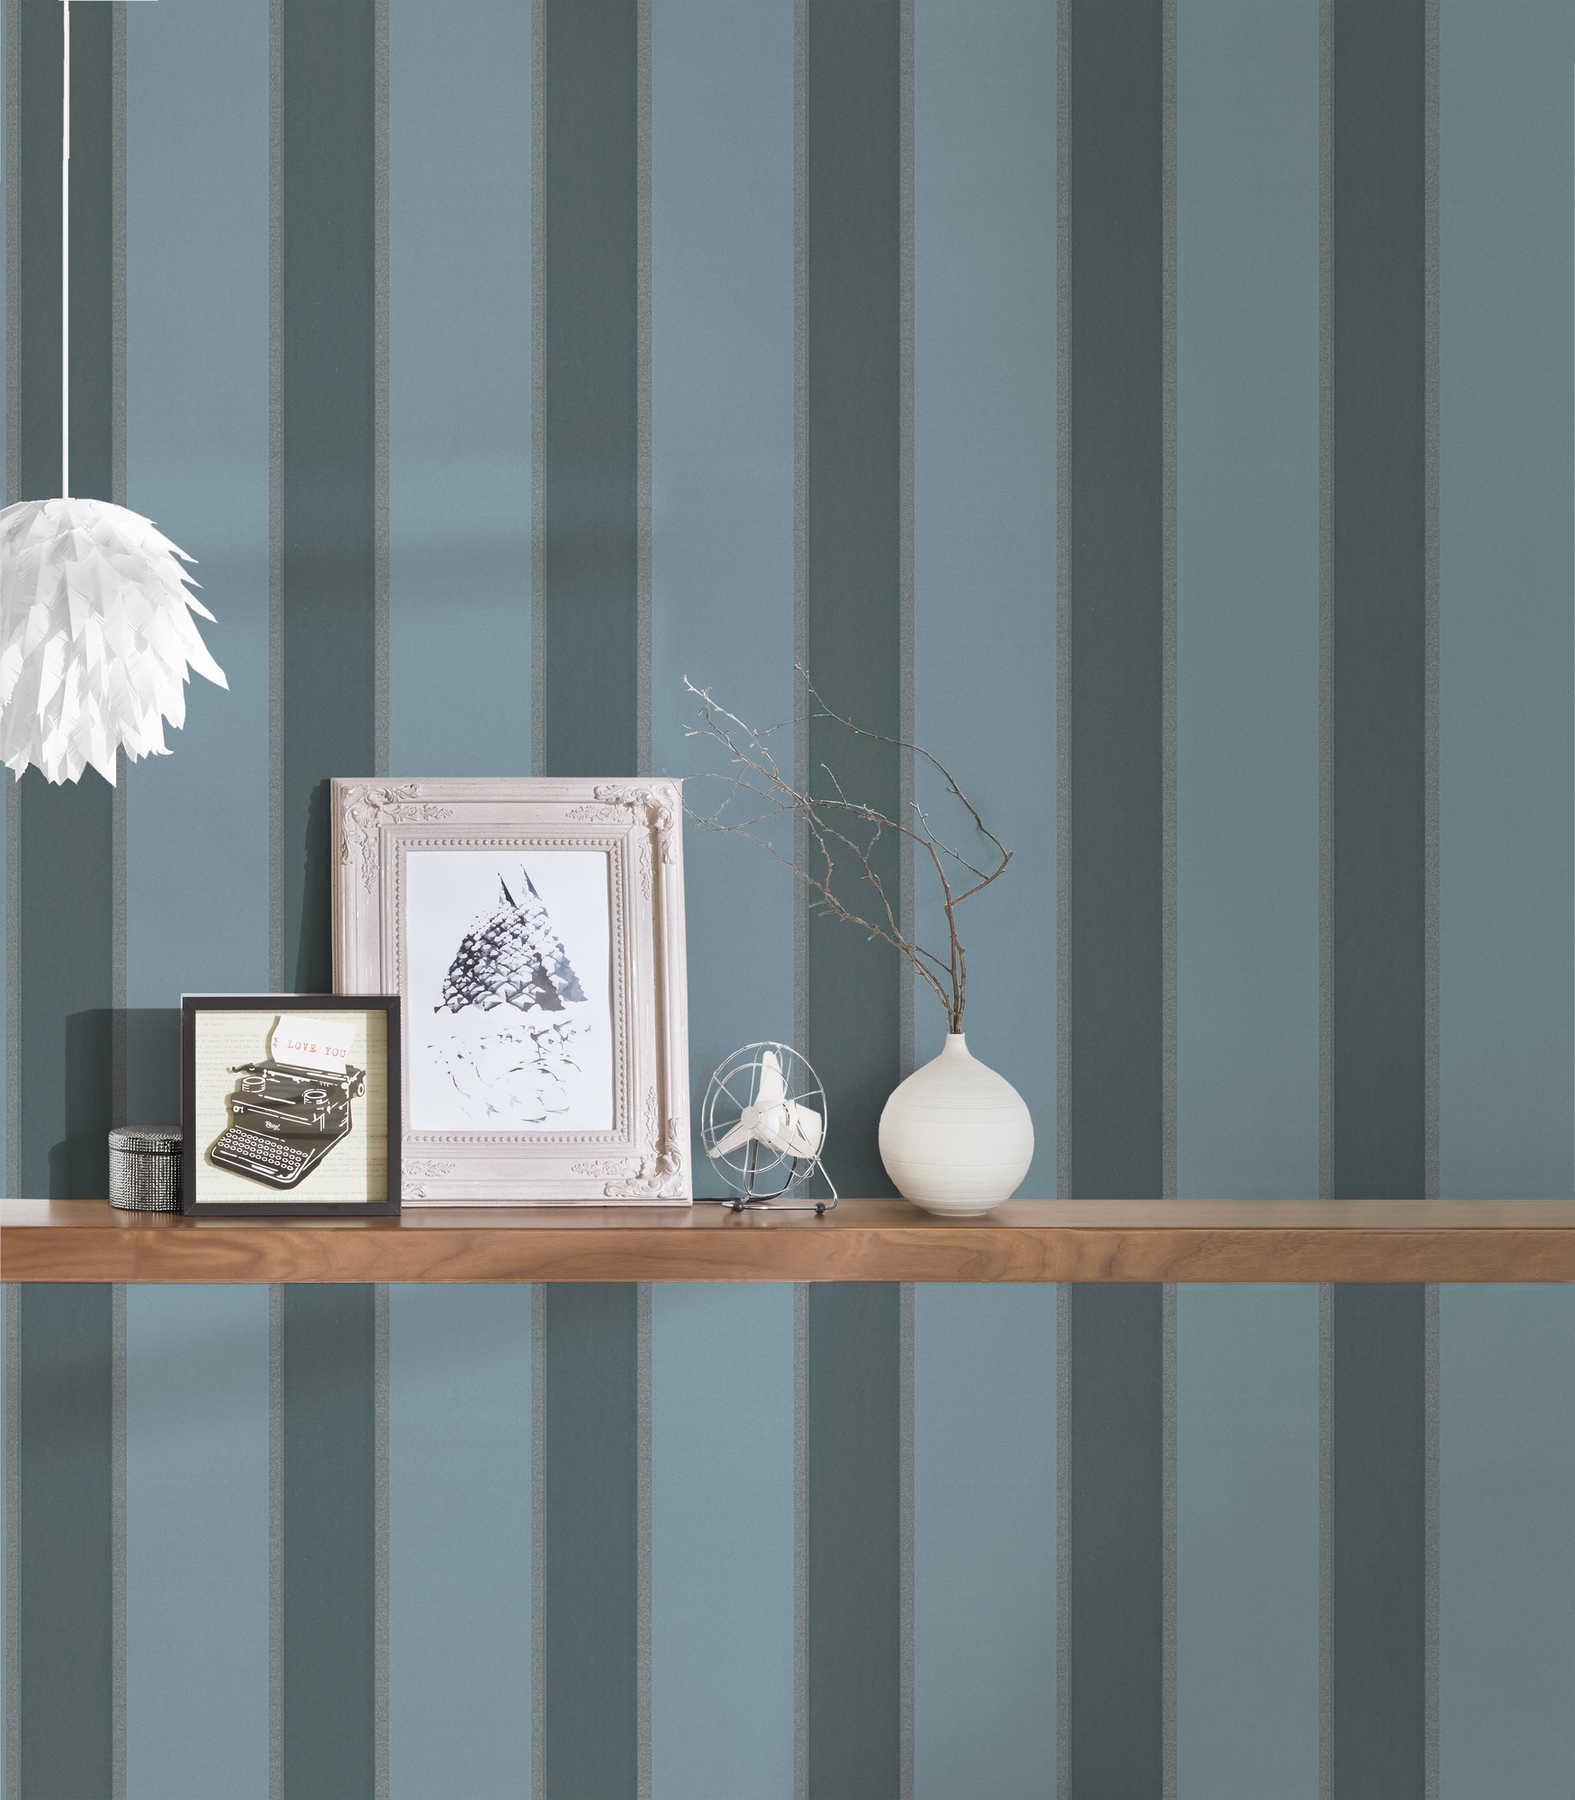             Stripes non-woven wallpaper with metallic accent - blue
        